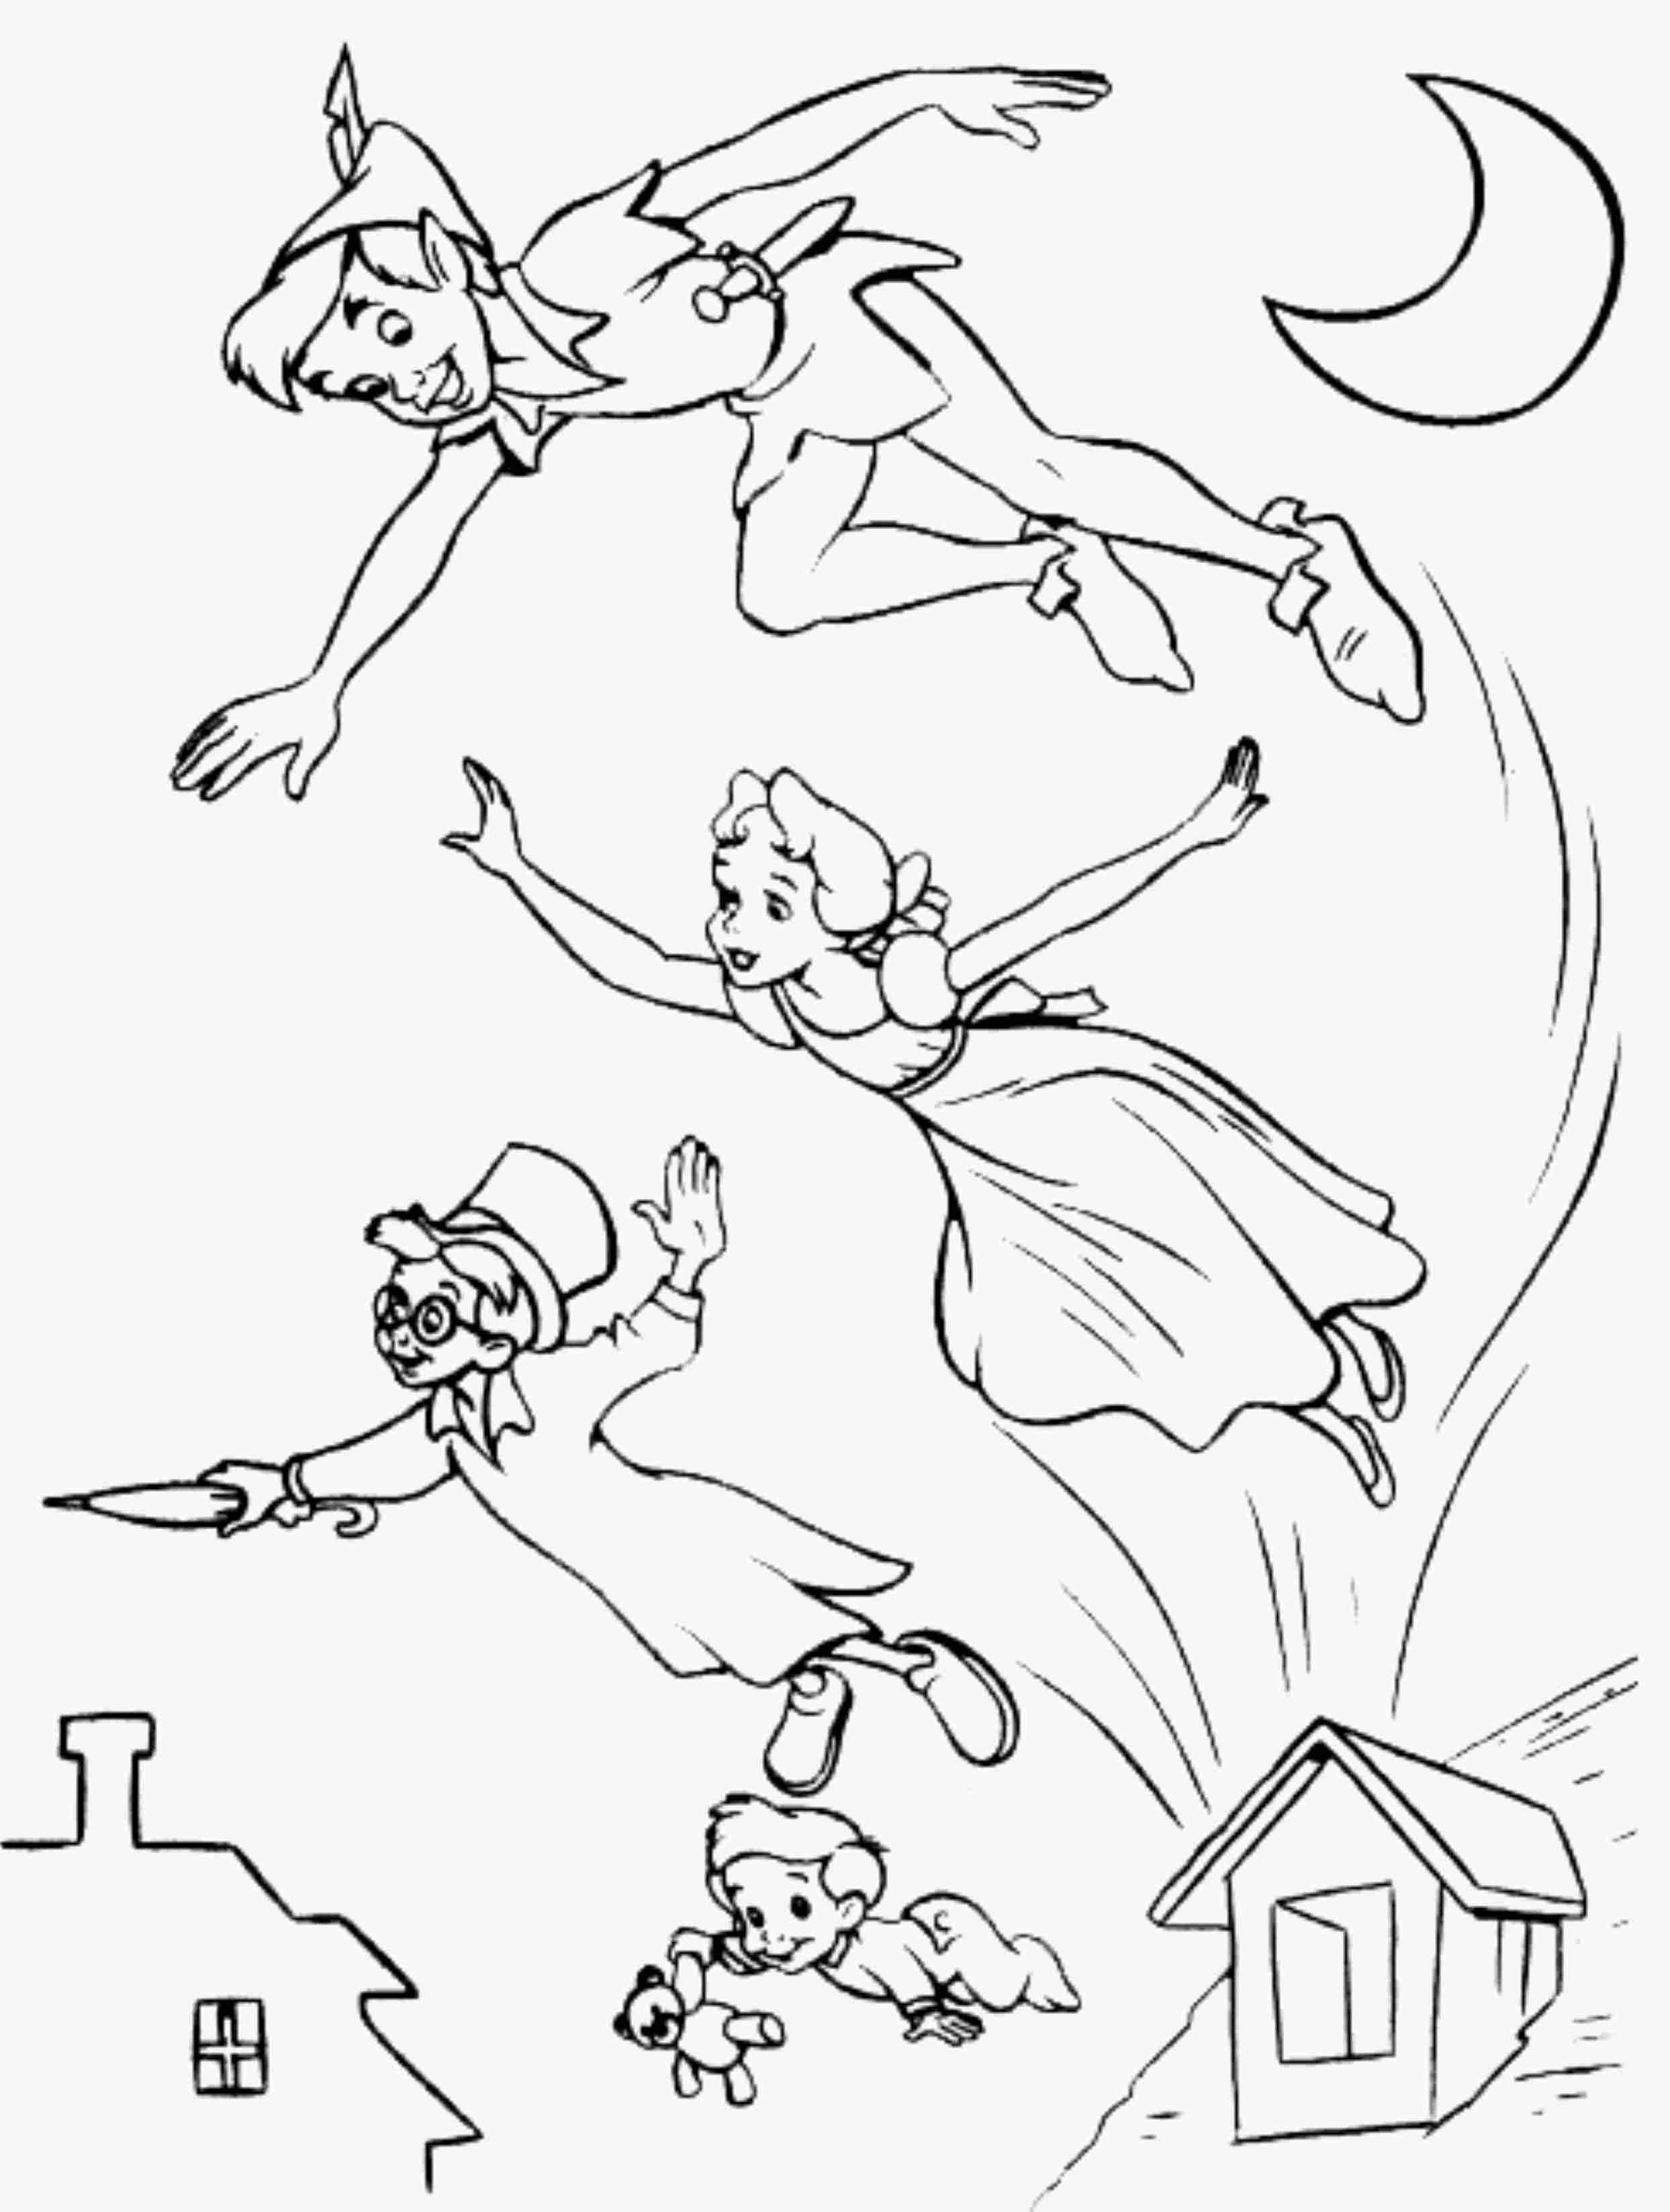 Print & Download - Fun Peter Pan Coloring Pages Downloaded for Free